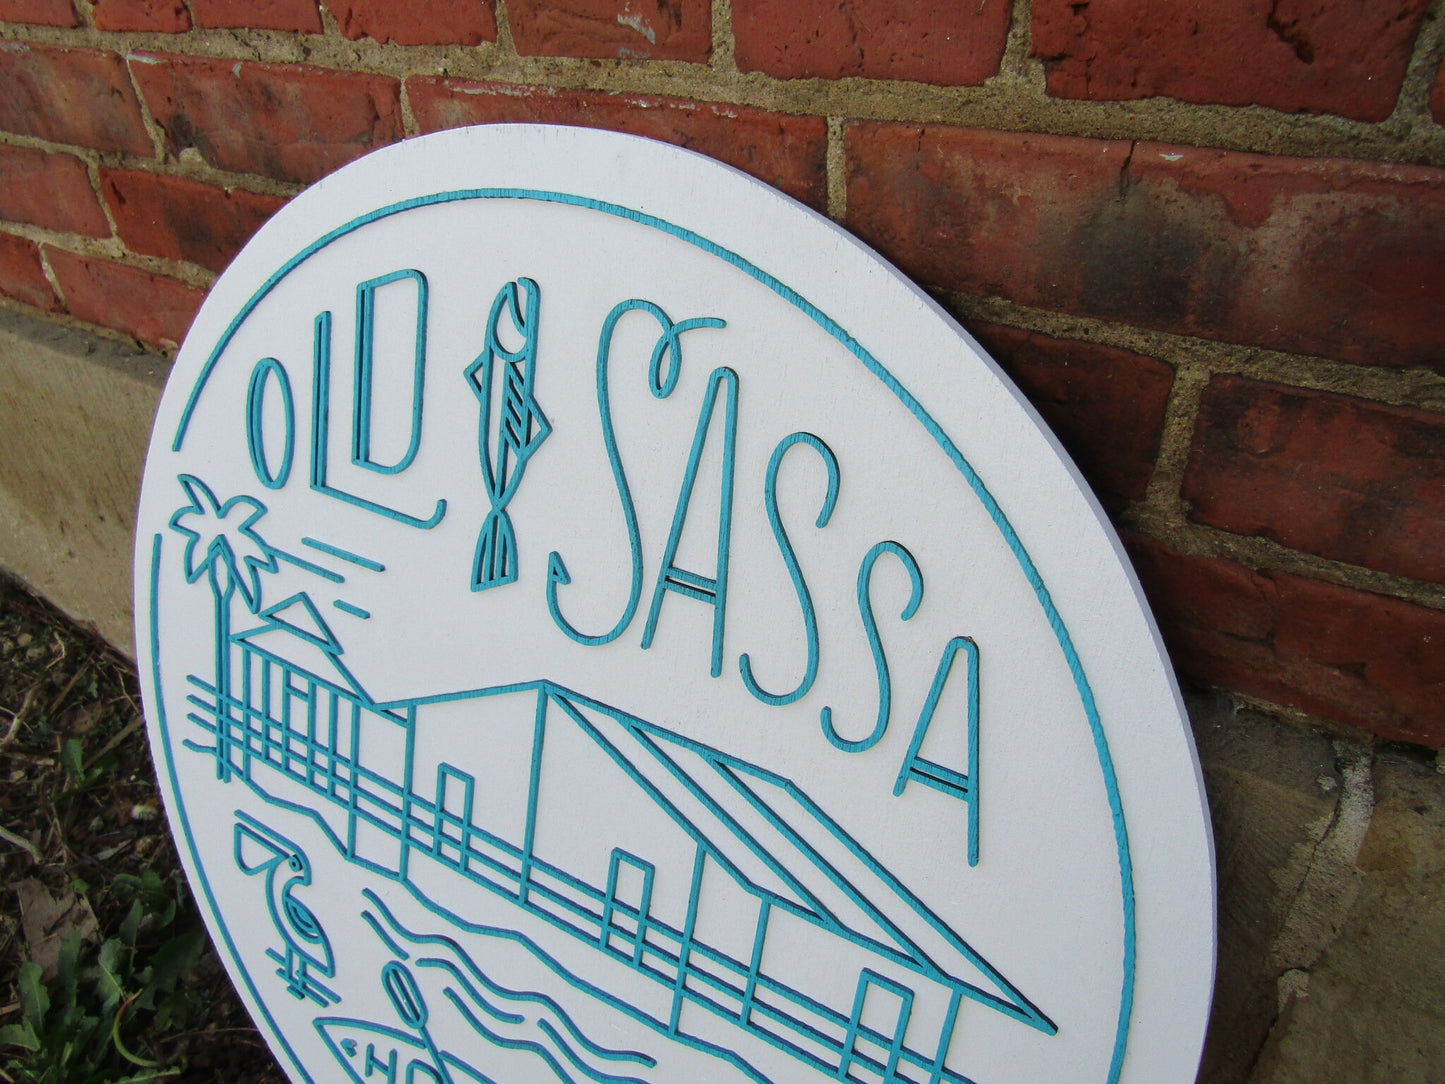 Custom Sign Round Business Commerical Signage Minimalist Made to Order Old Sassa House Store Front Small Shop Logo Circle Wooden Handmade